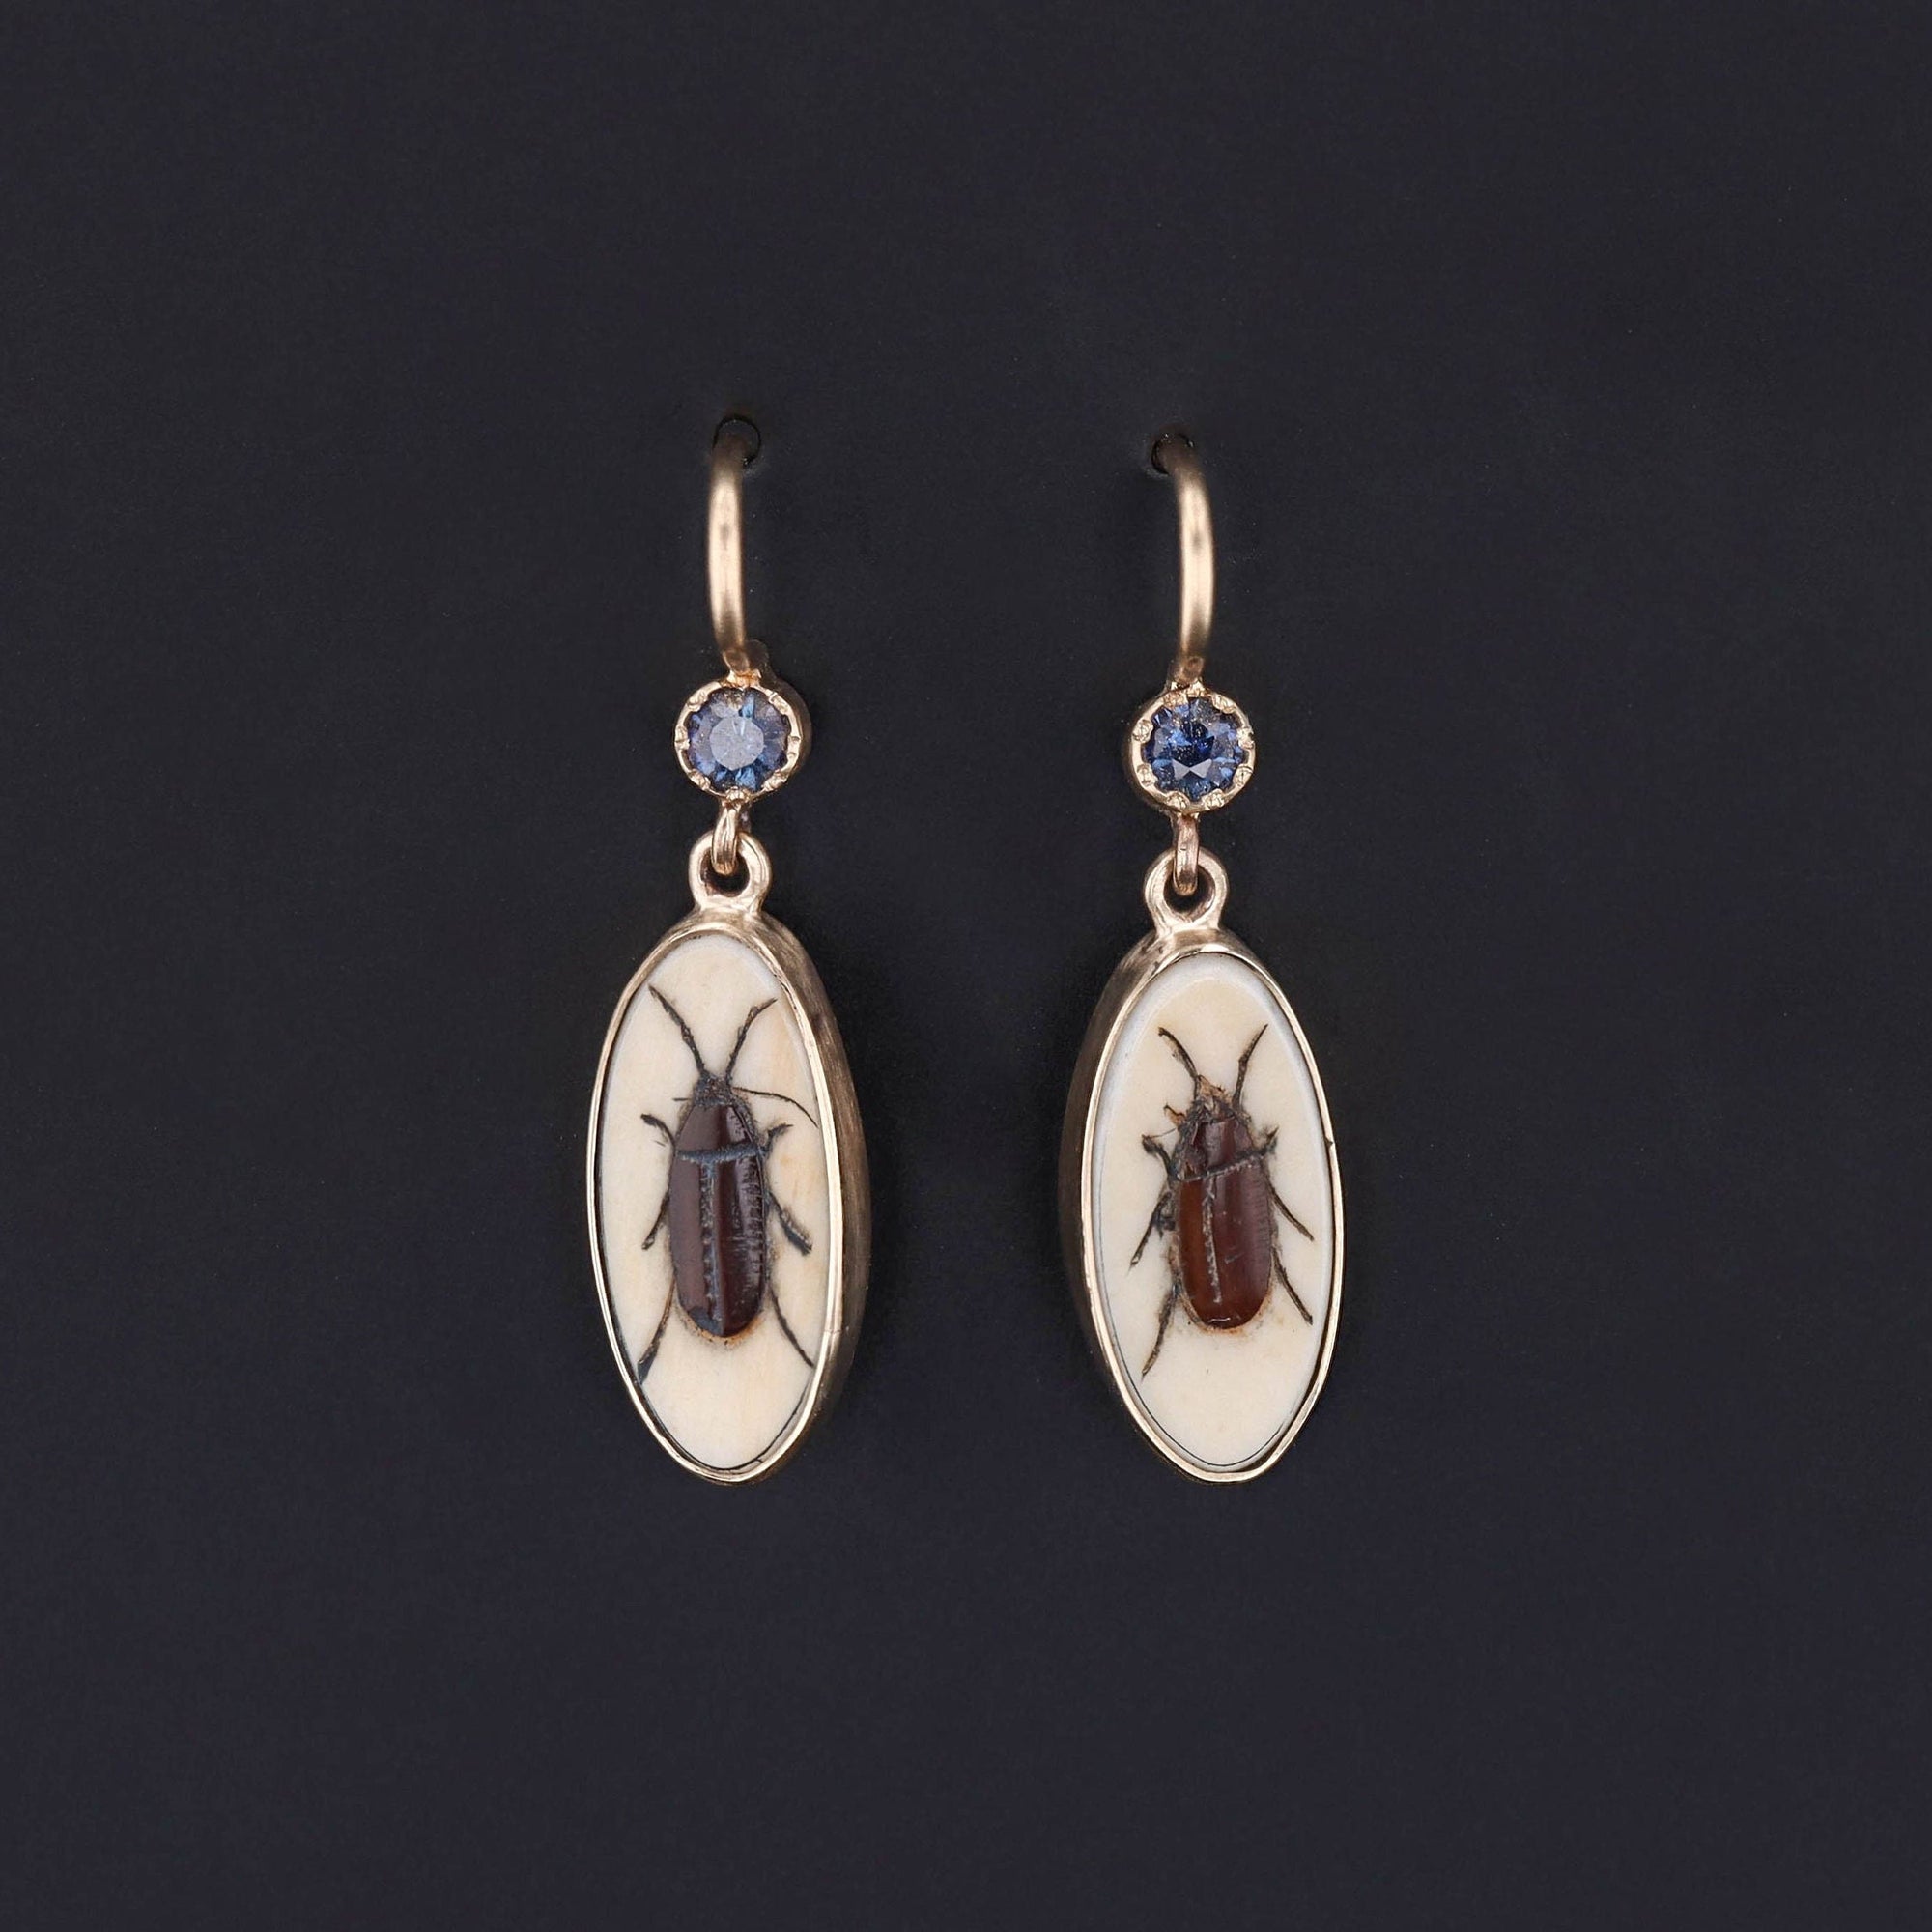 Antique Shibayama Insect Conversion Earrings of 14k Gold